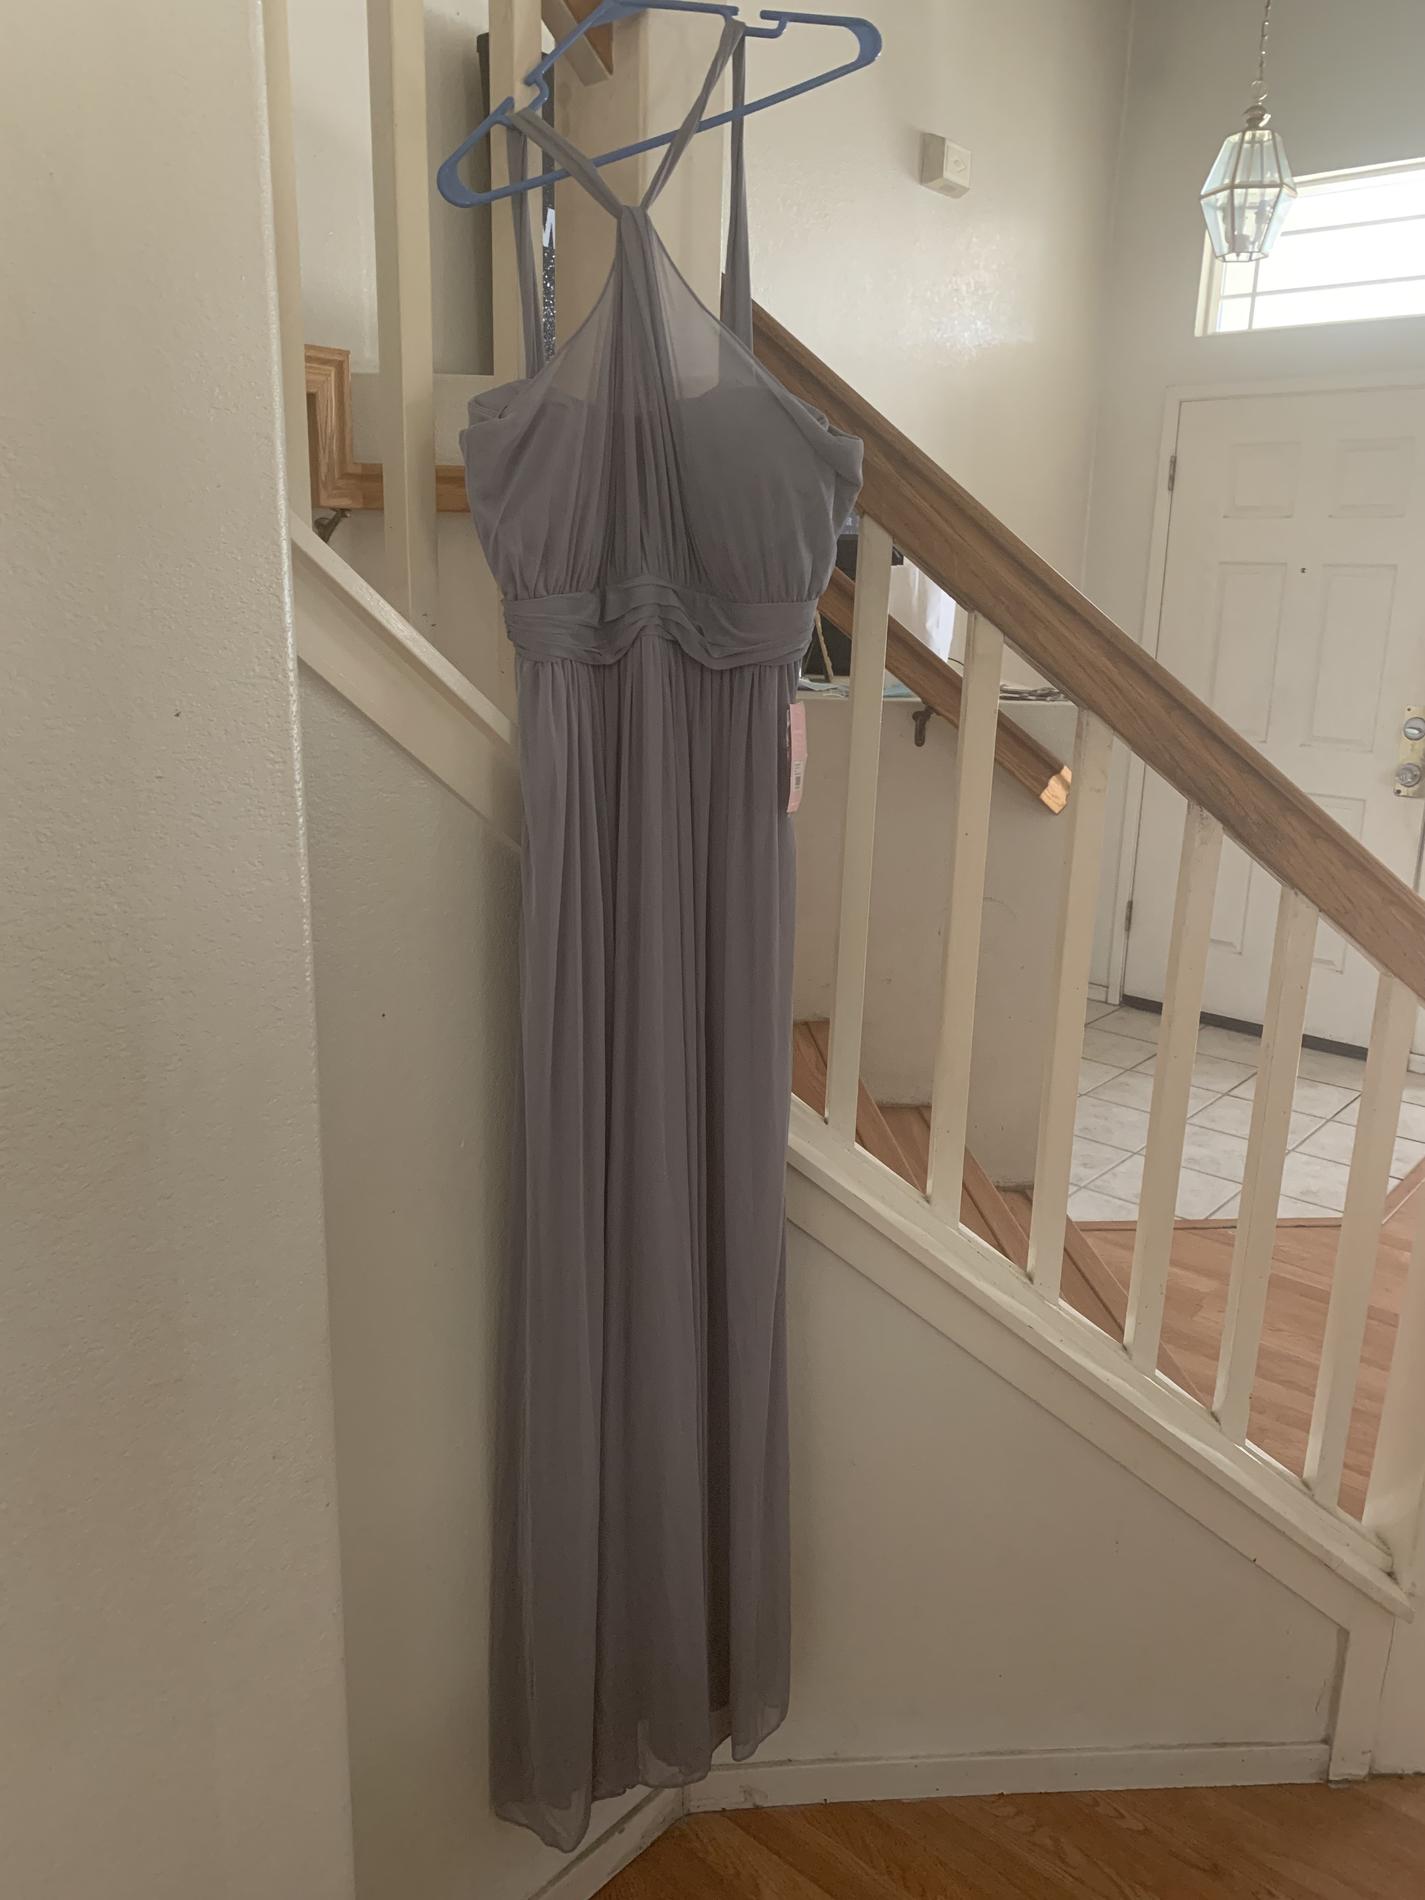 Silver Size 16 Straight Dress on Queenly